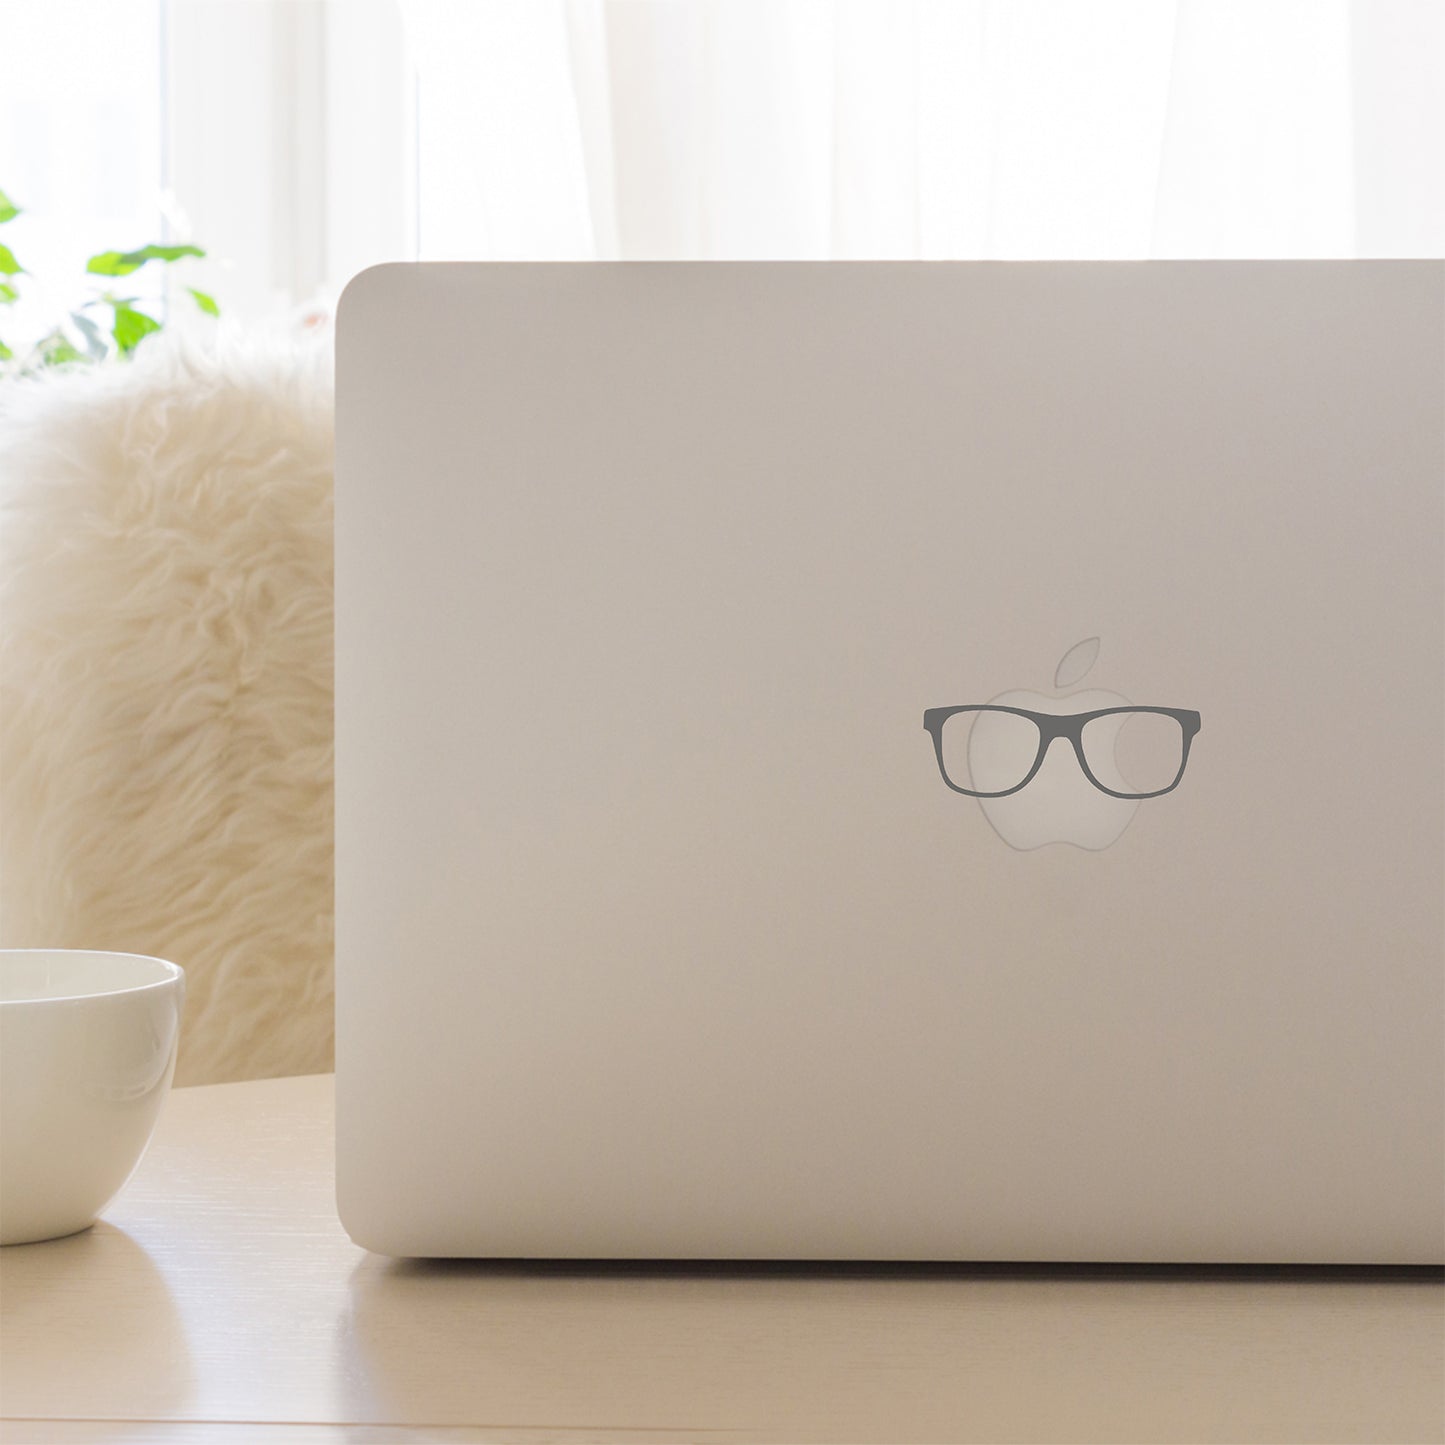 Hipster glasses | Laptop decal